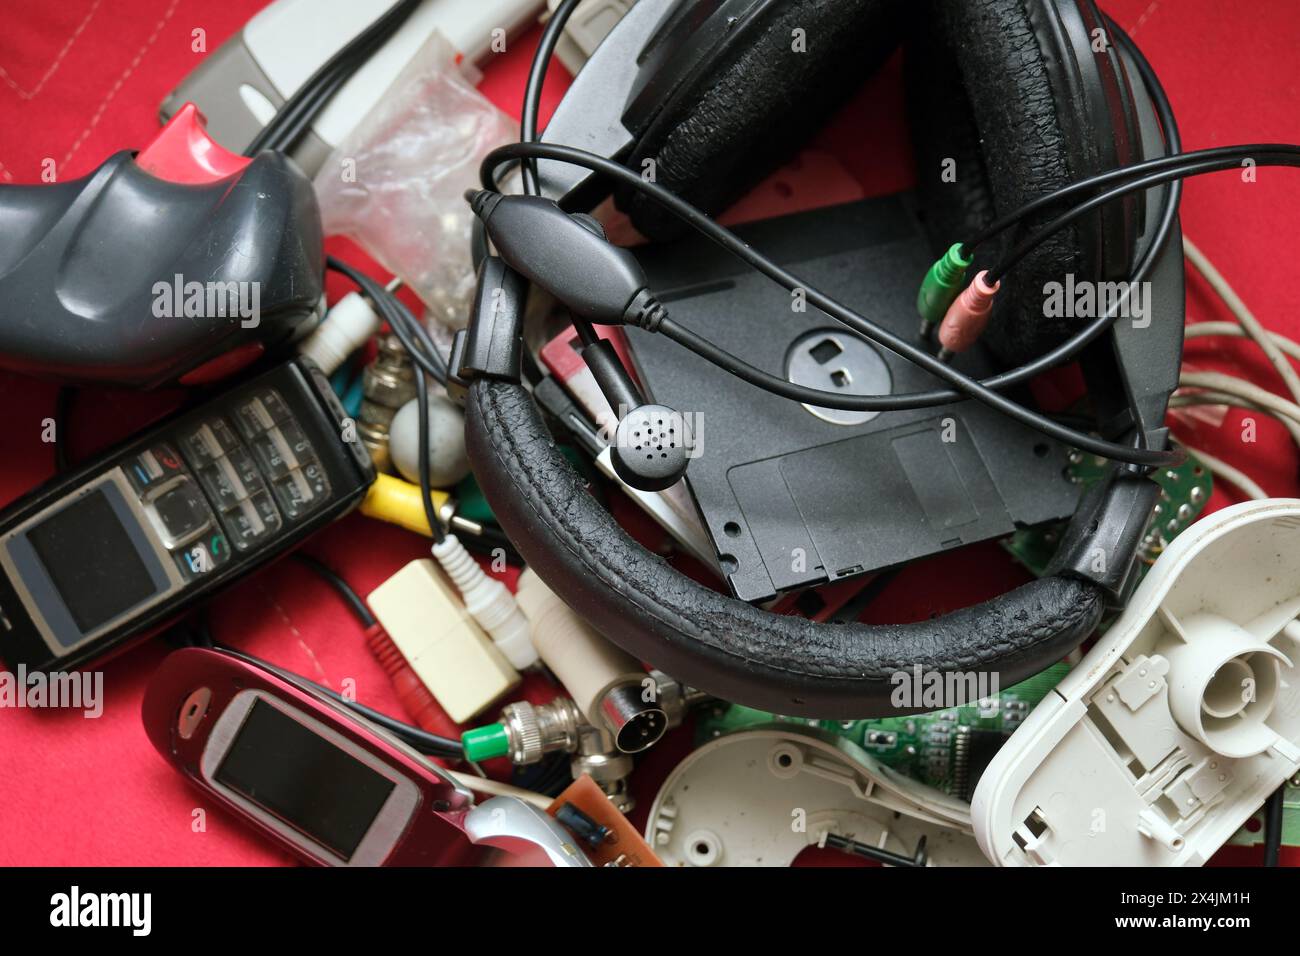 Electronic devices that have reached the end of their technological life. Electronics waiting for recycling or e-waste. Stock Photo